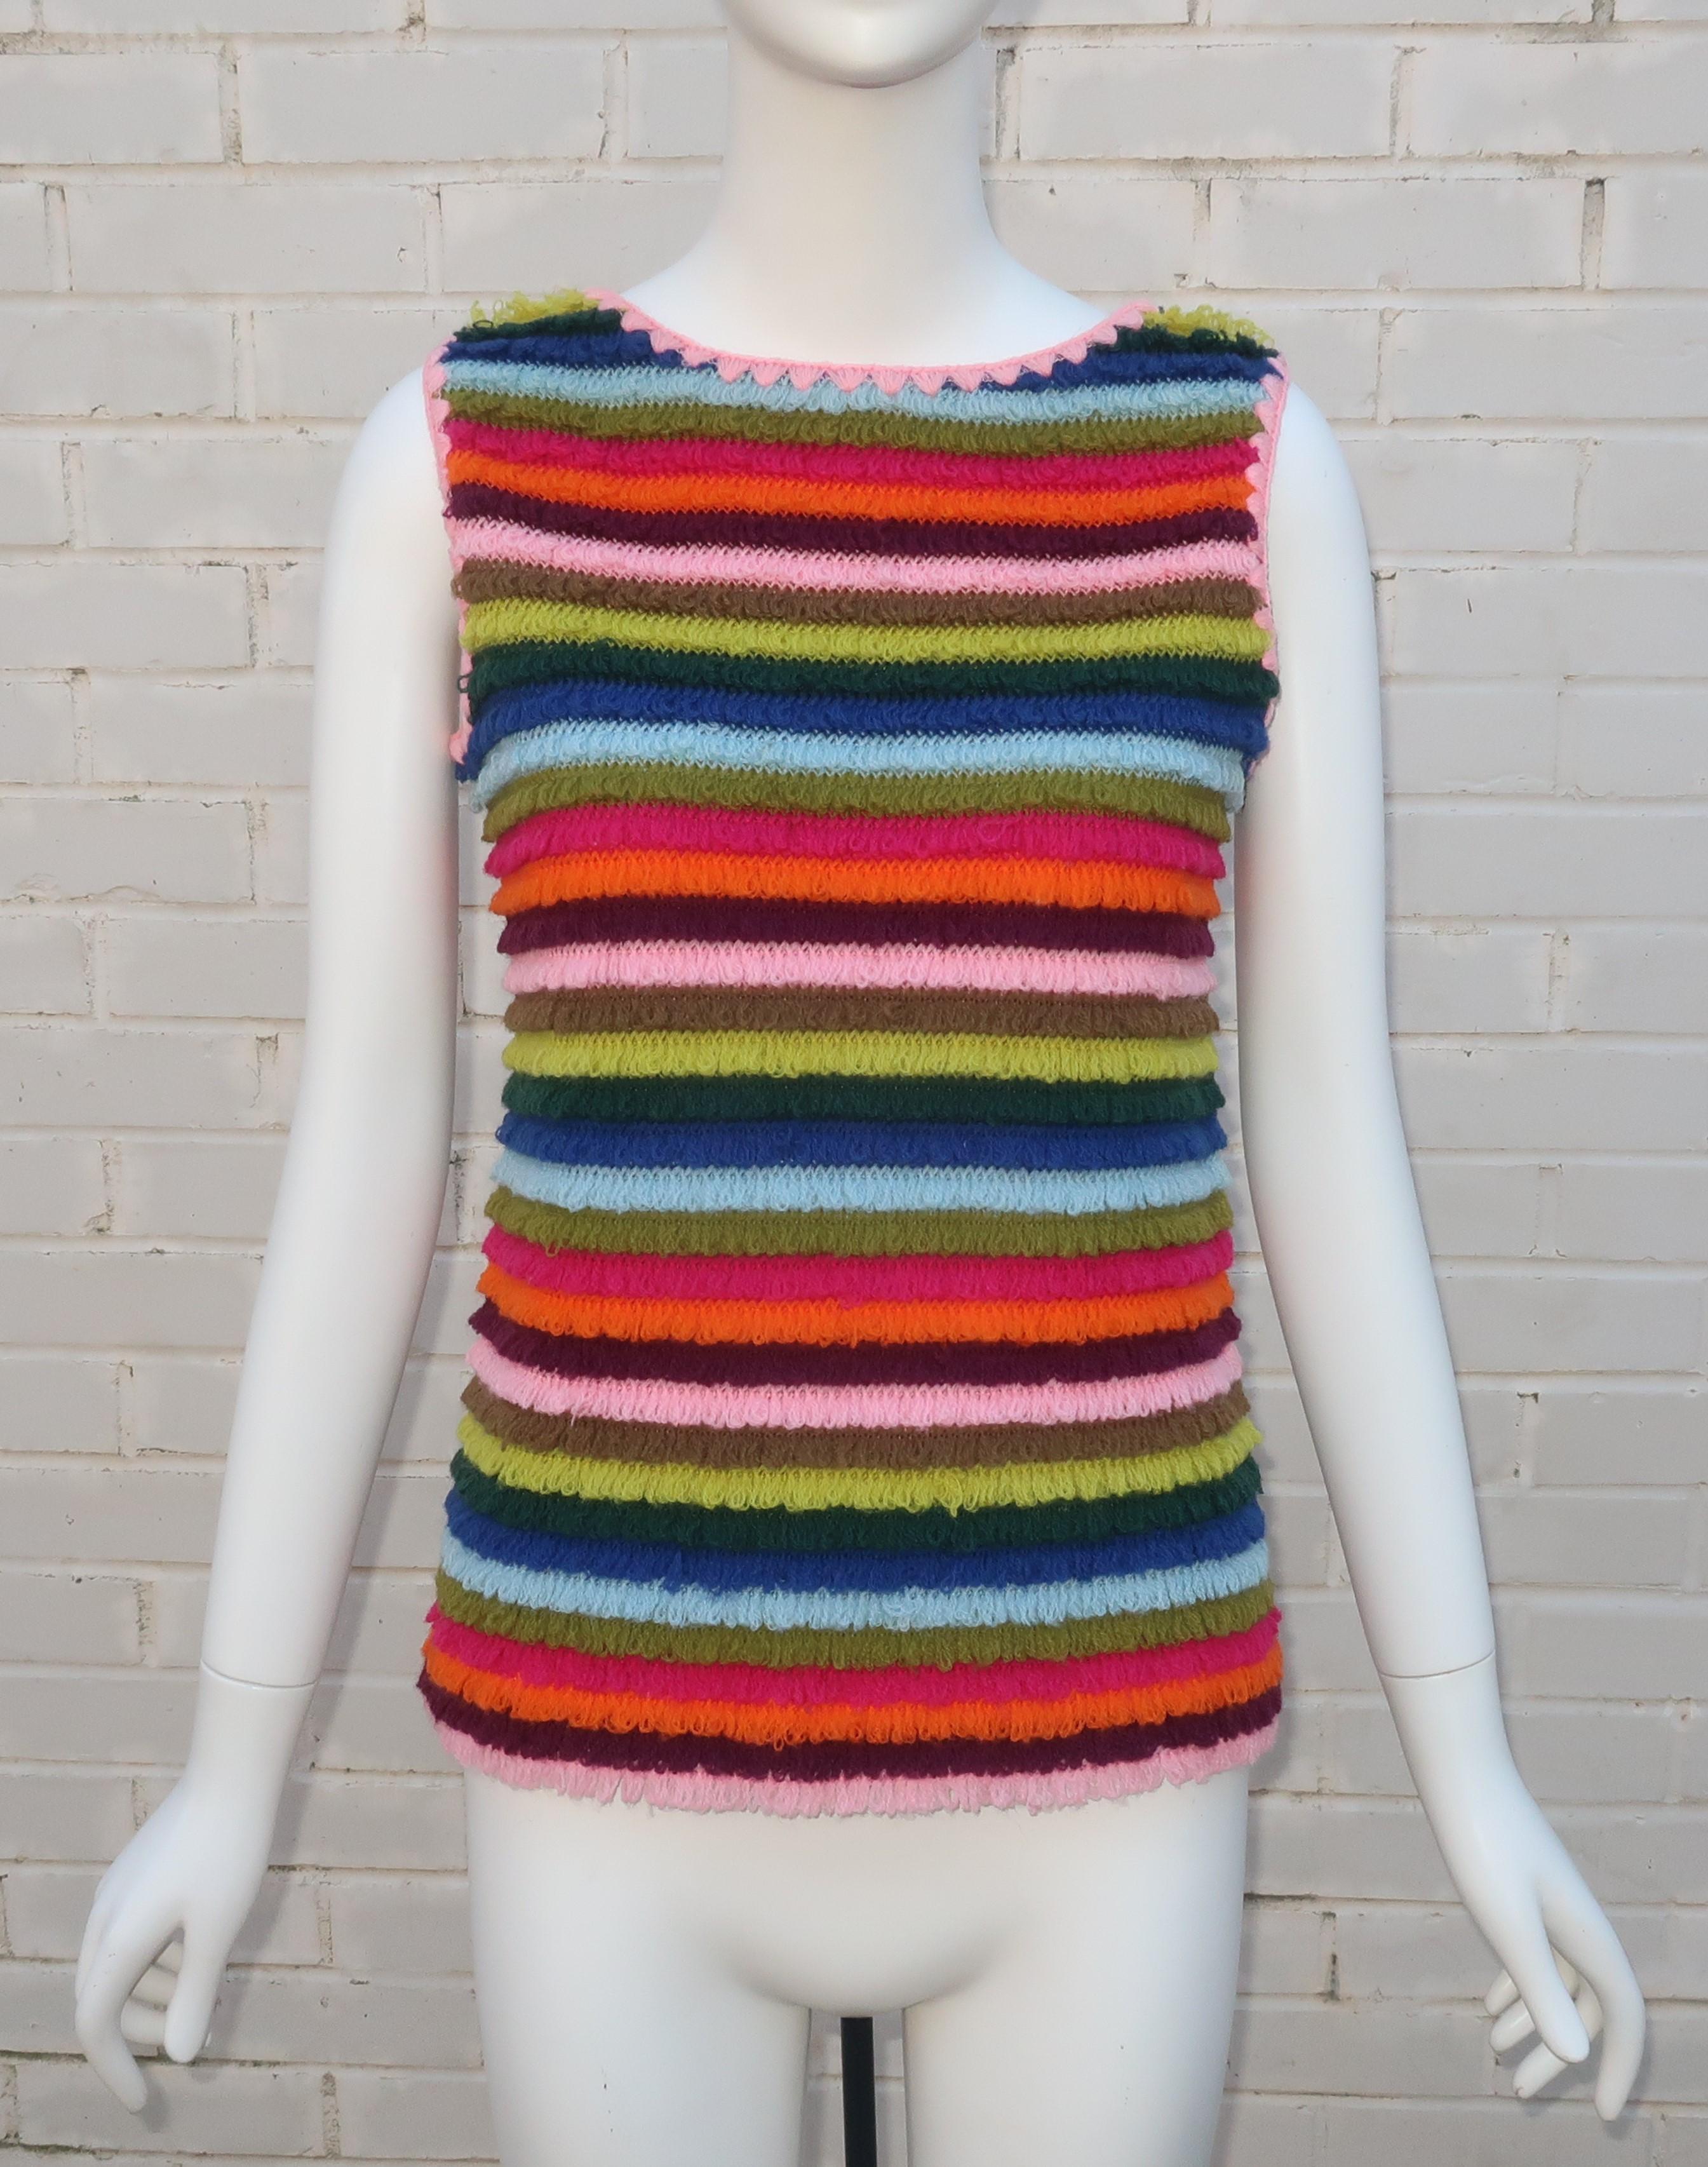 1960's Loubella of California looped wool yarn sweater vest.  The sleeveless pullover construction has a button keyhole closure at the back.  This fun piece sports a combination of happy colors including baby blue, pink, eggplant, lime green,